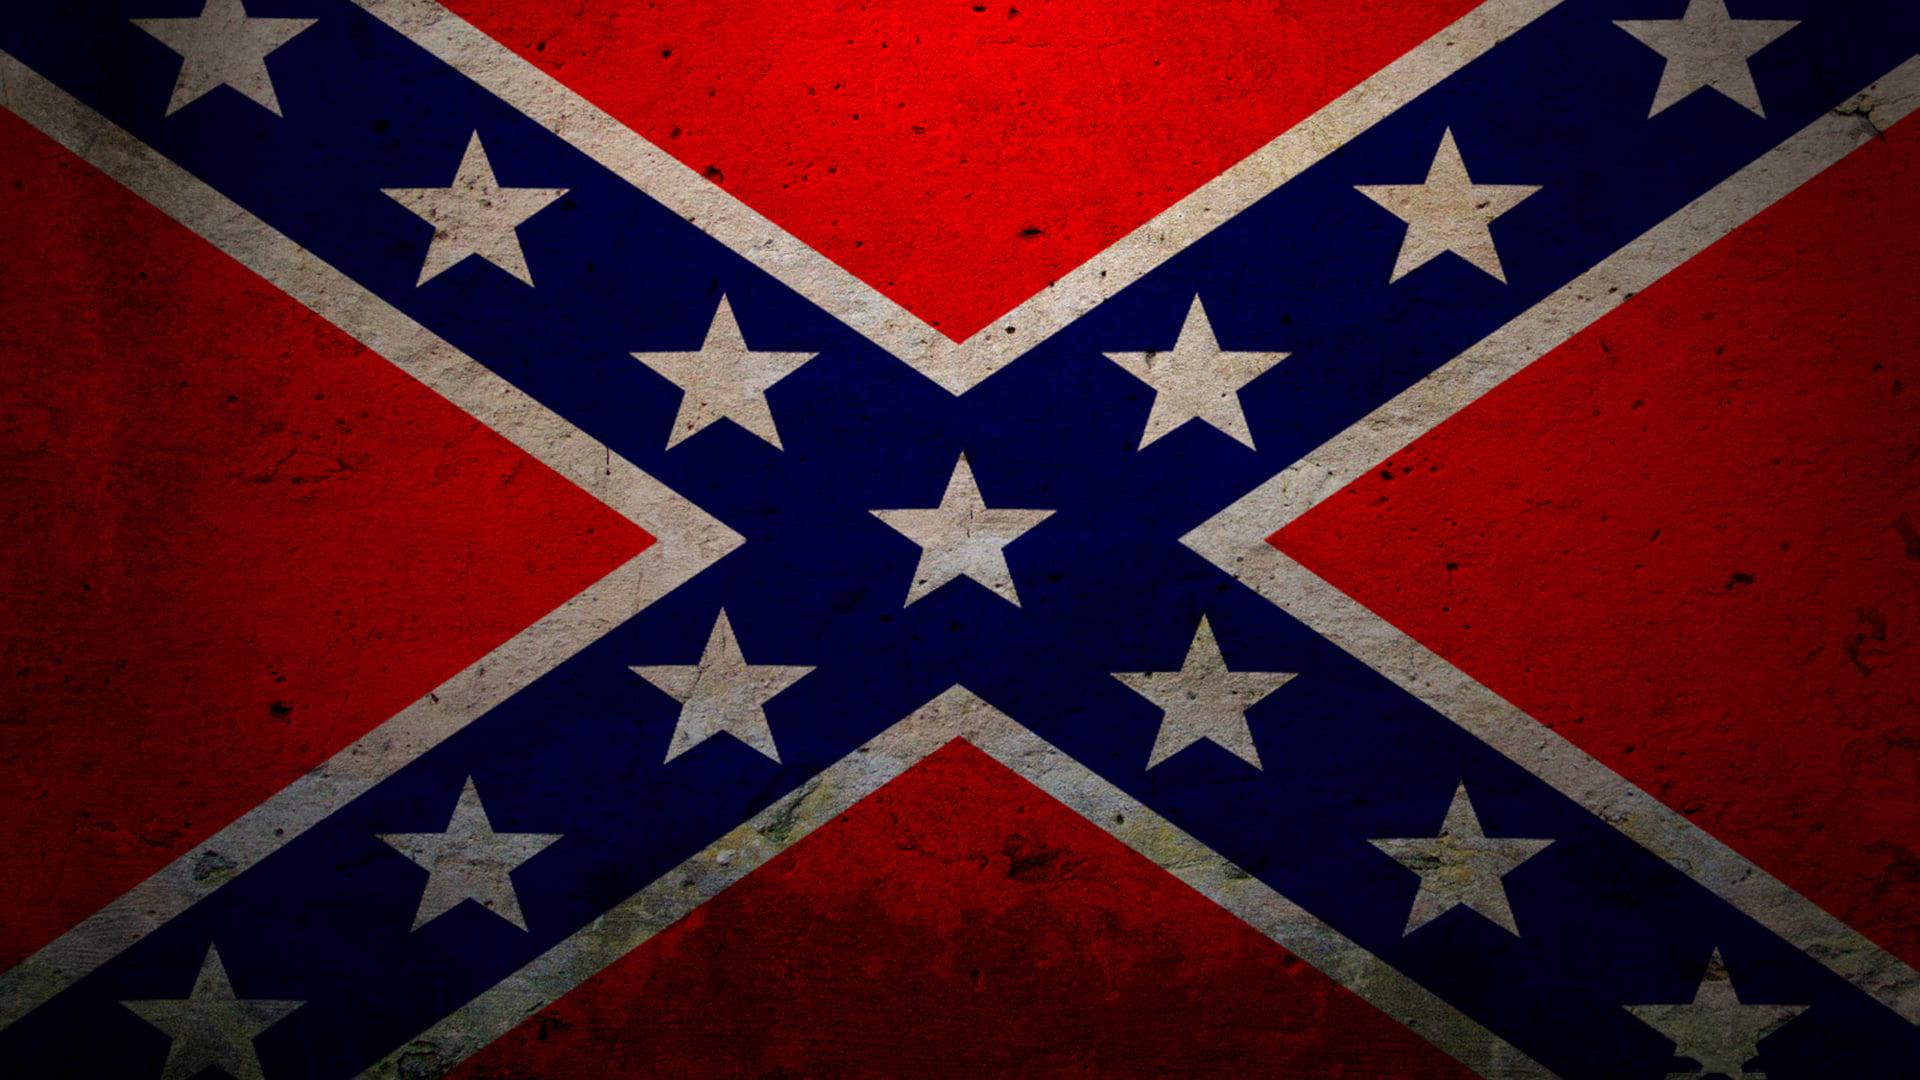 C.S.A.: The Confederate States of America backdrop